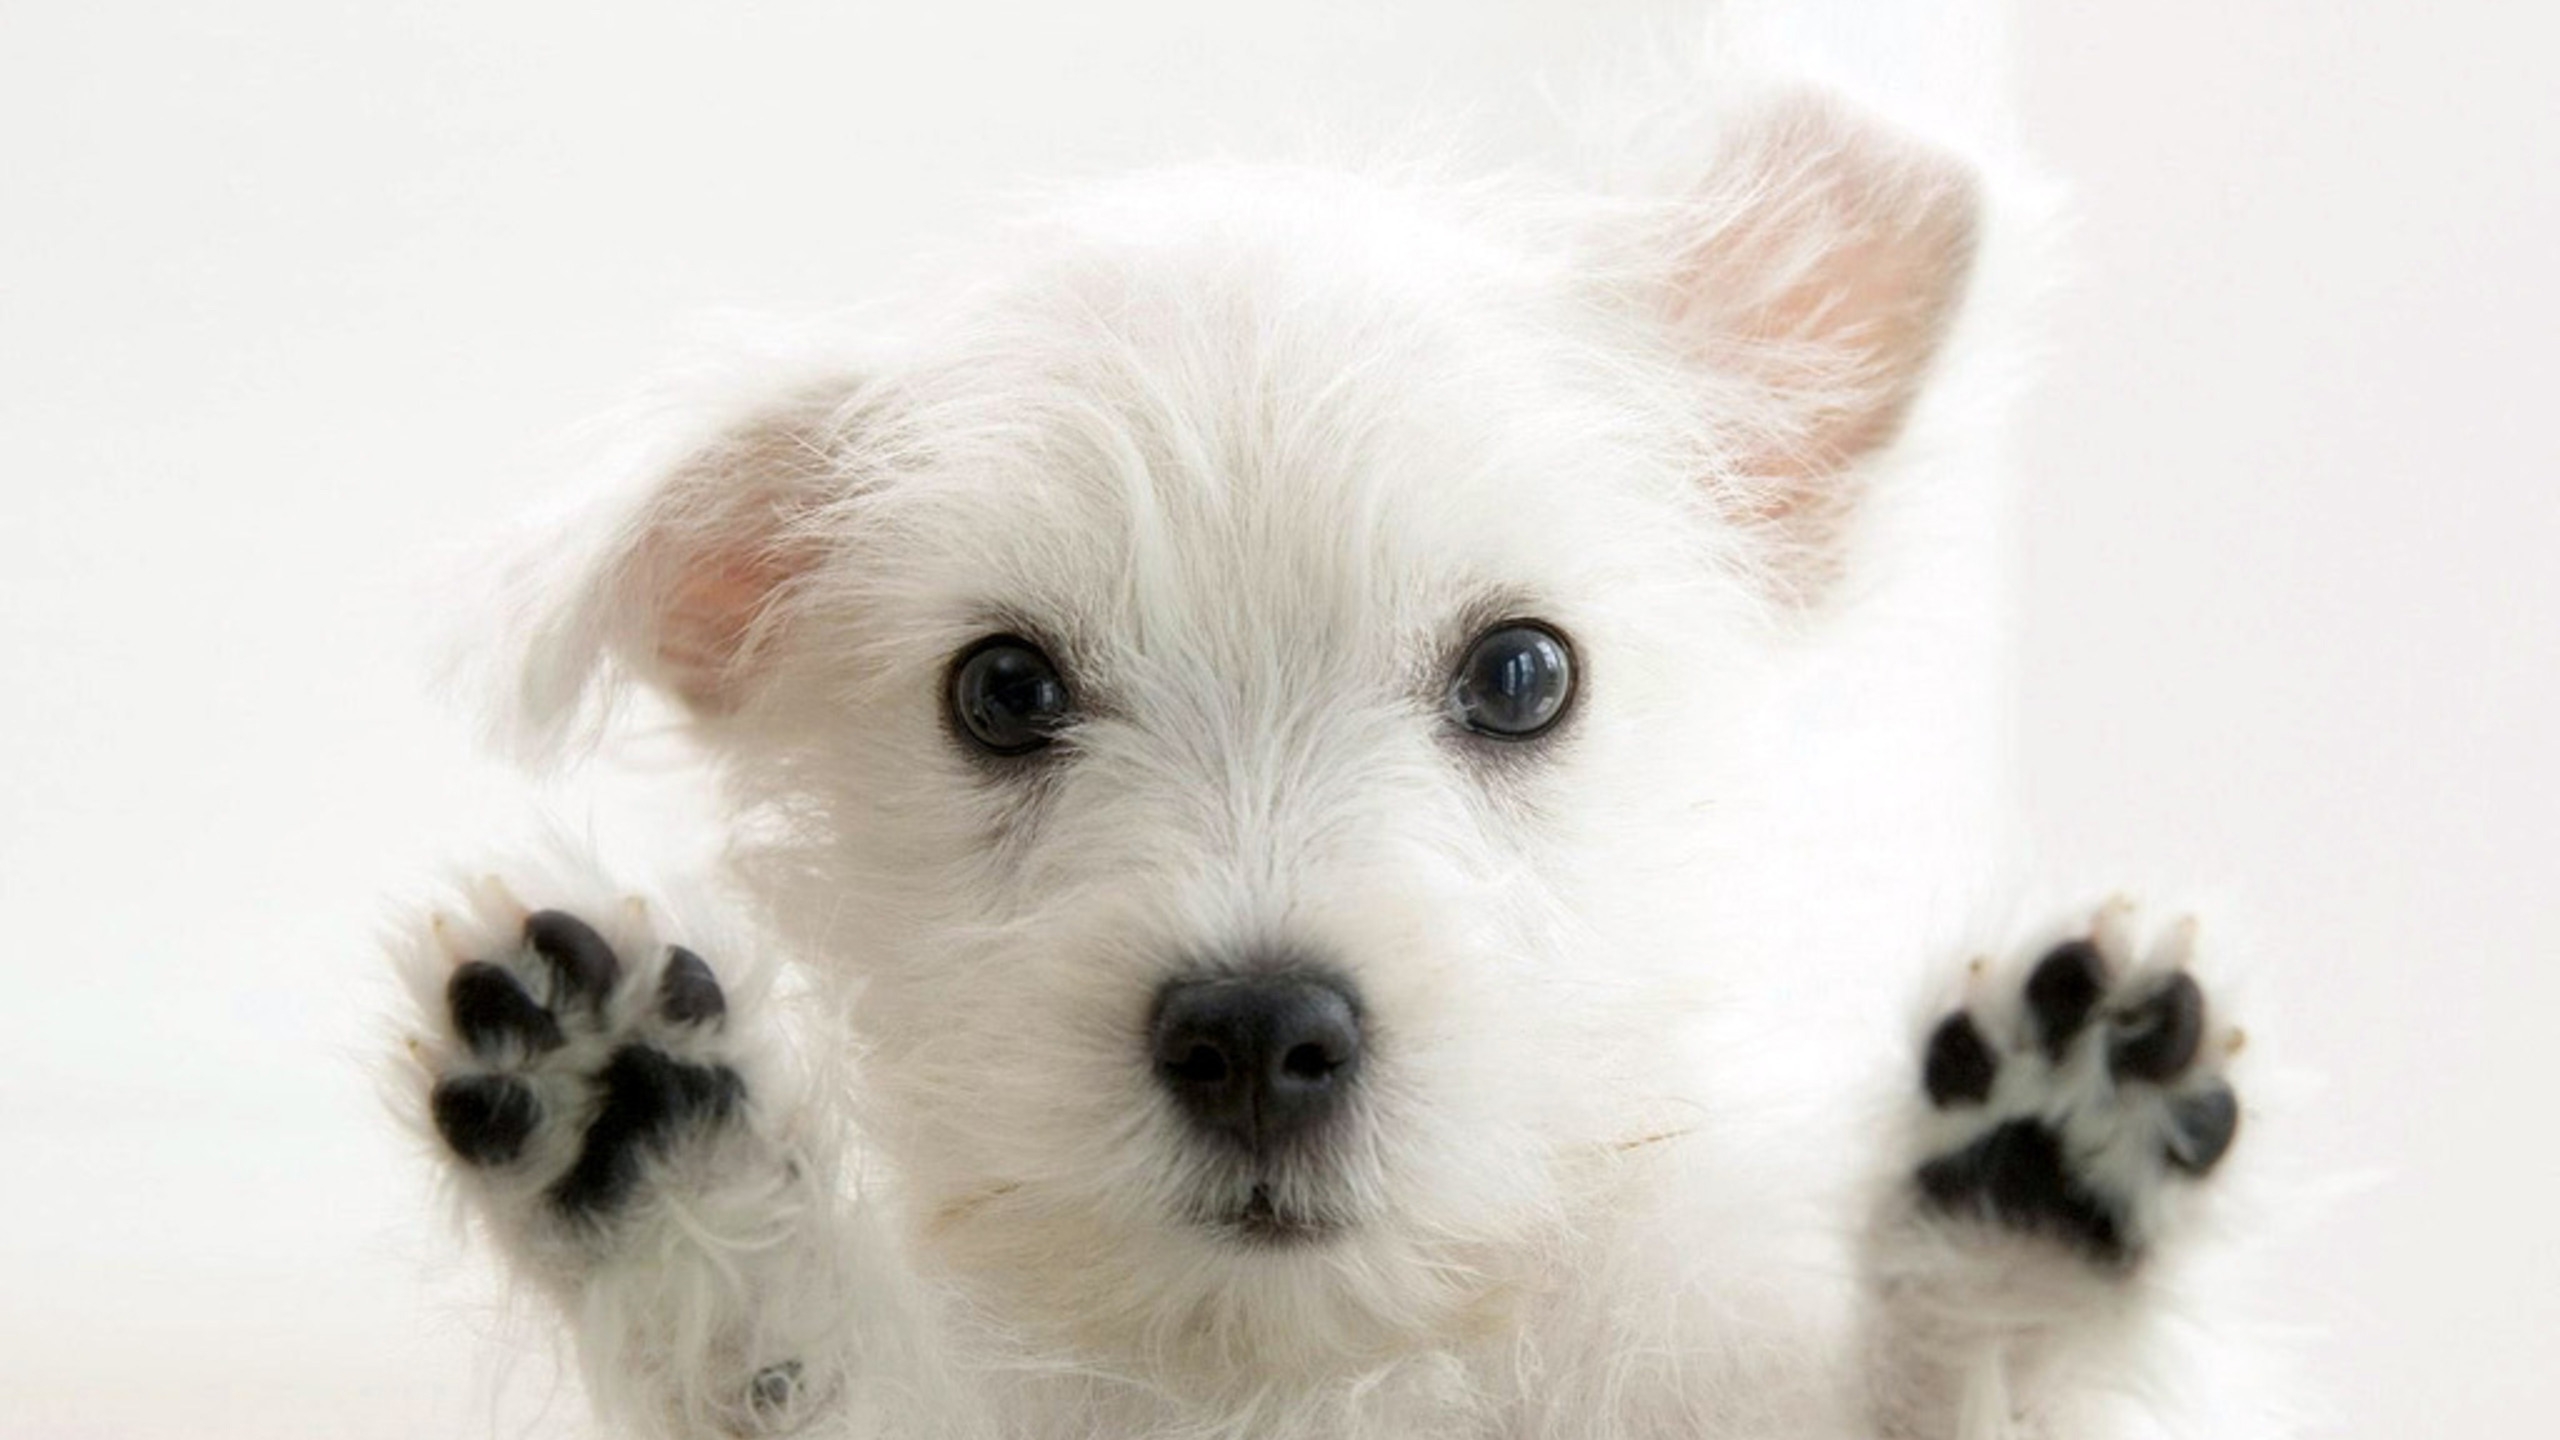 Very cute Dog for 2560x1440 HDTV resolution